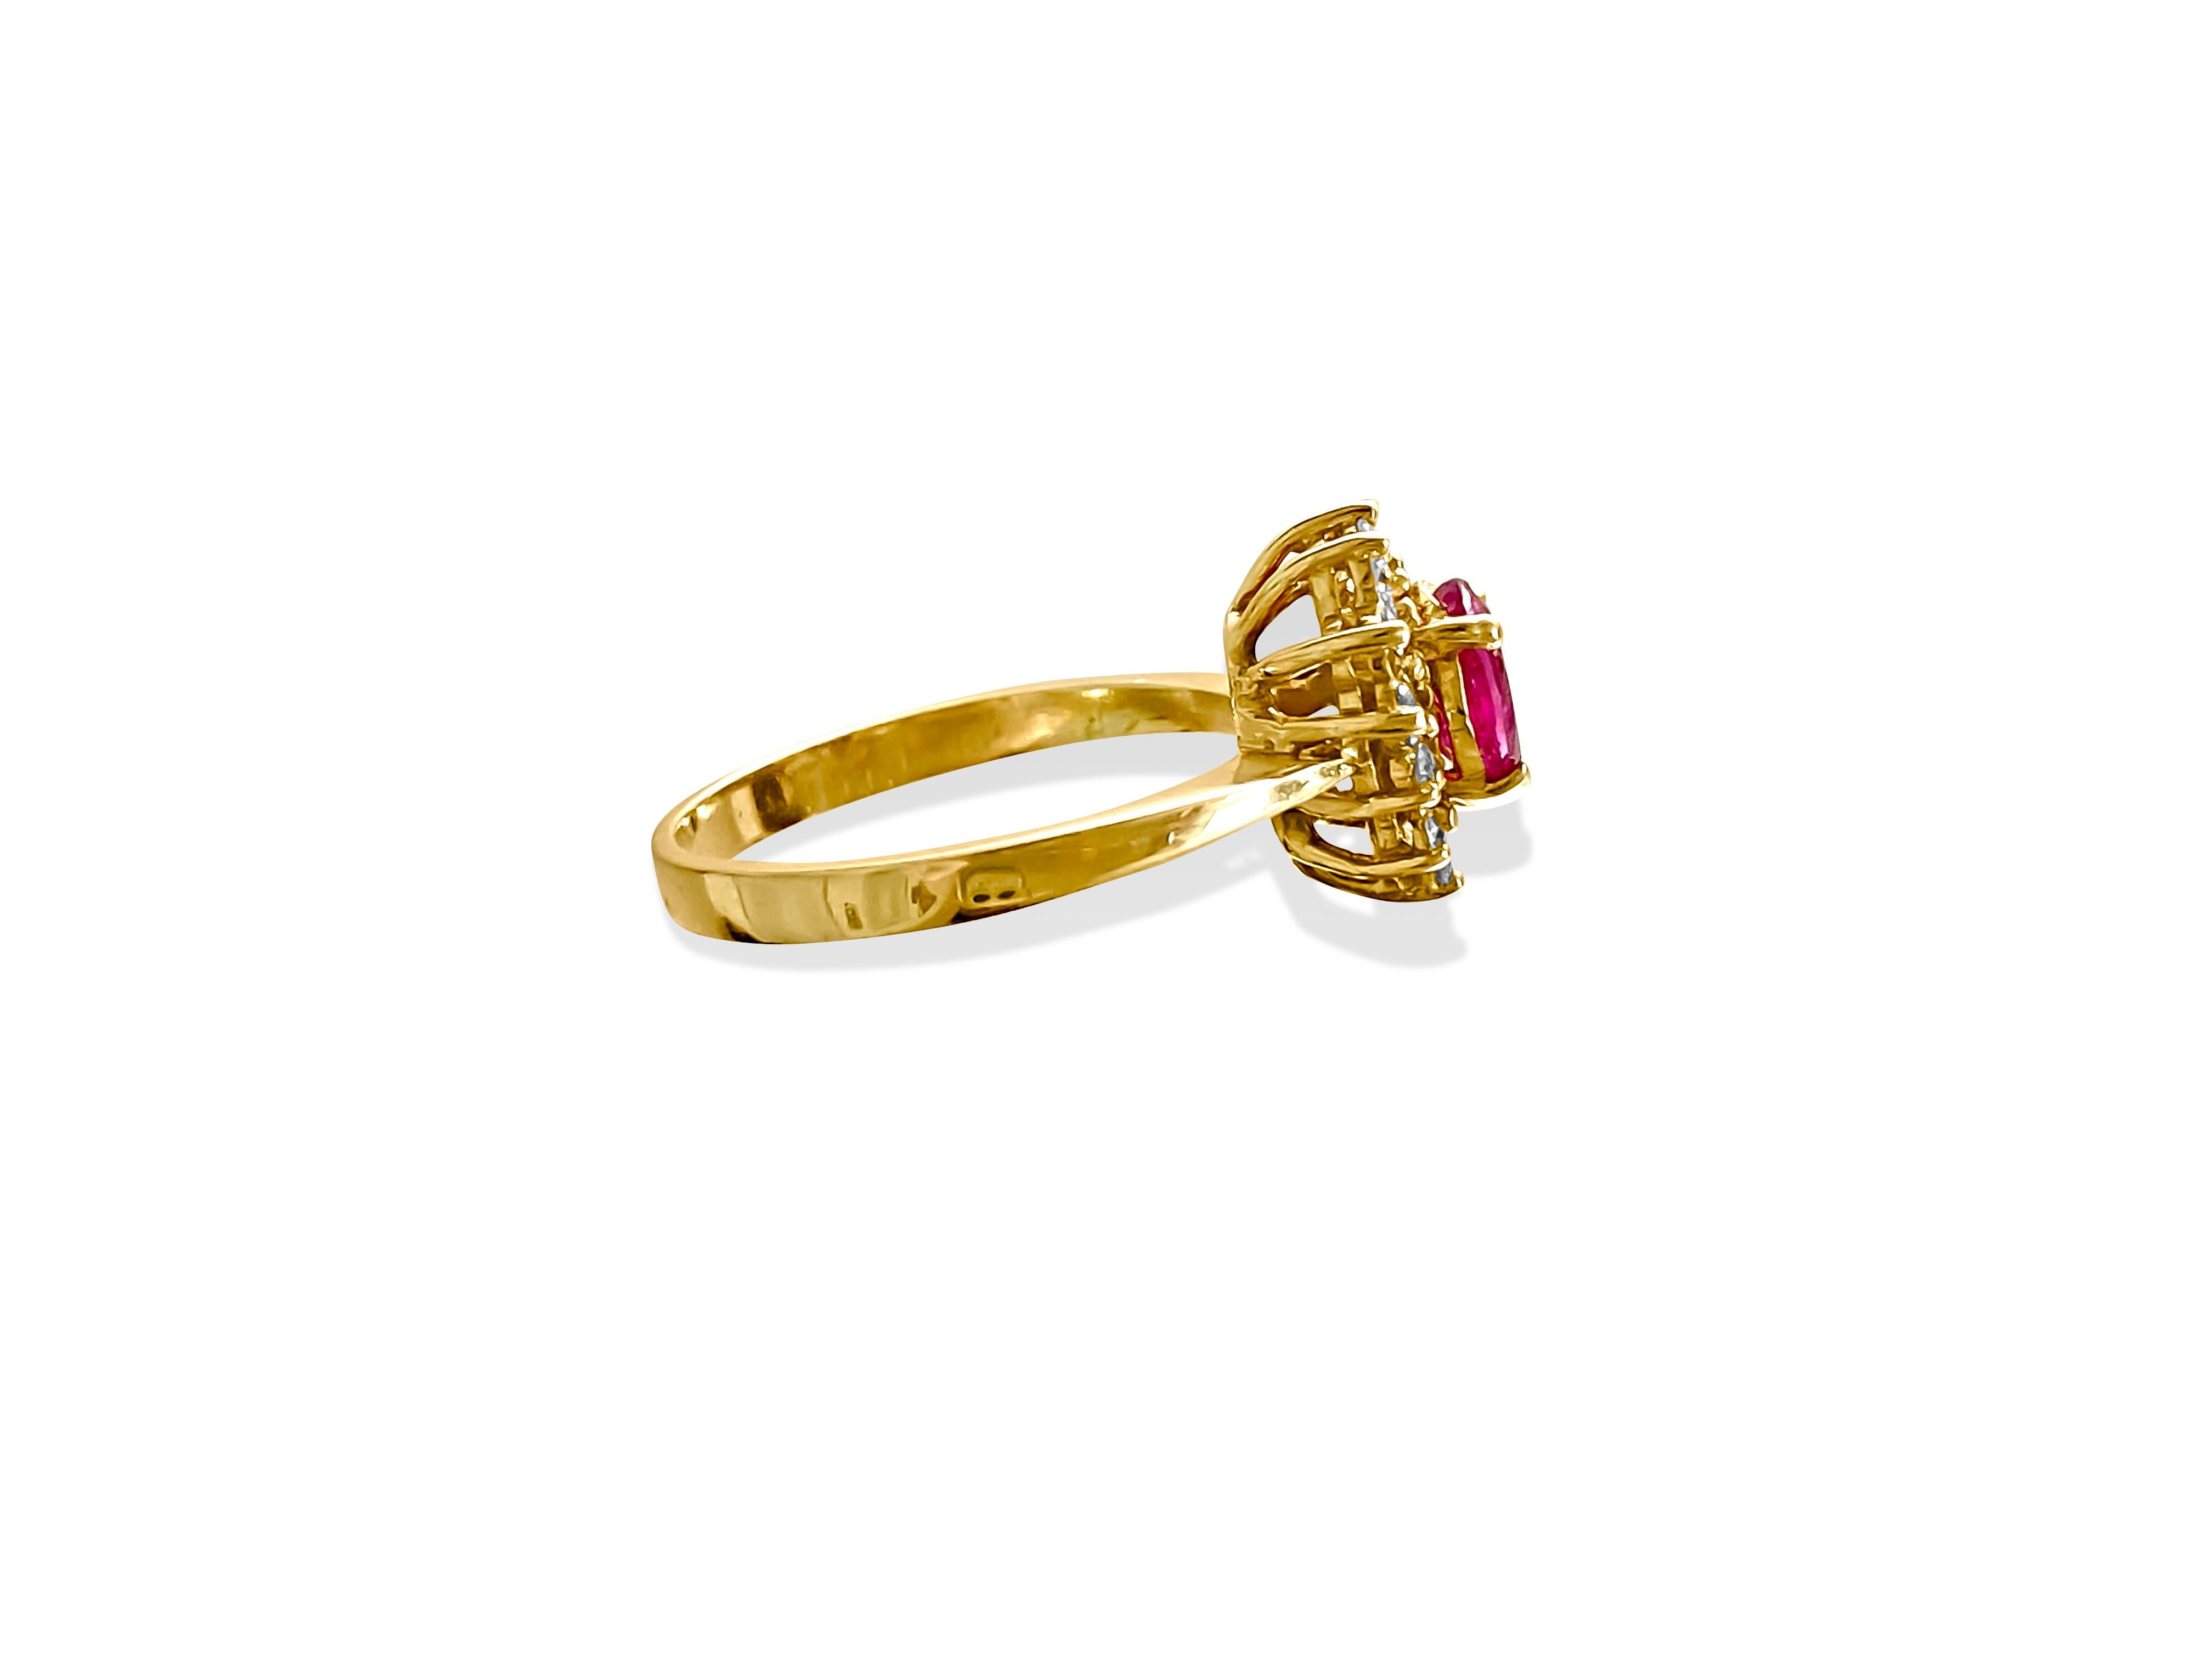 Metal: 14K yellow gold.
Gemstones: Exquisite marquise cut Ruby. Round brilliant cut diamonds.
Setting: All precious stones expertly set in secure prongs.
Diamond Details: High-quality diamonds with exceptional brilliance.
Round brilliant cut for